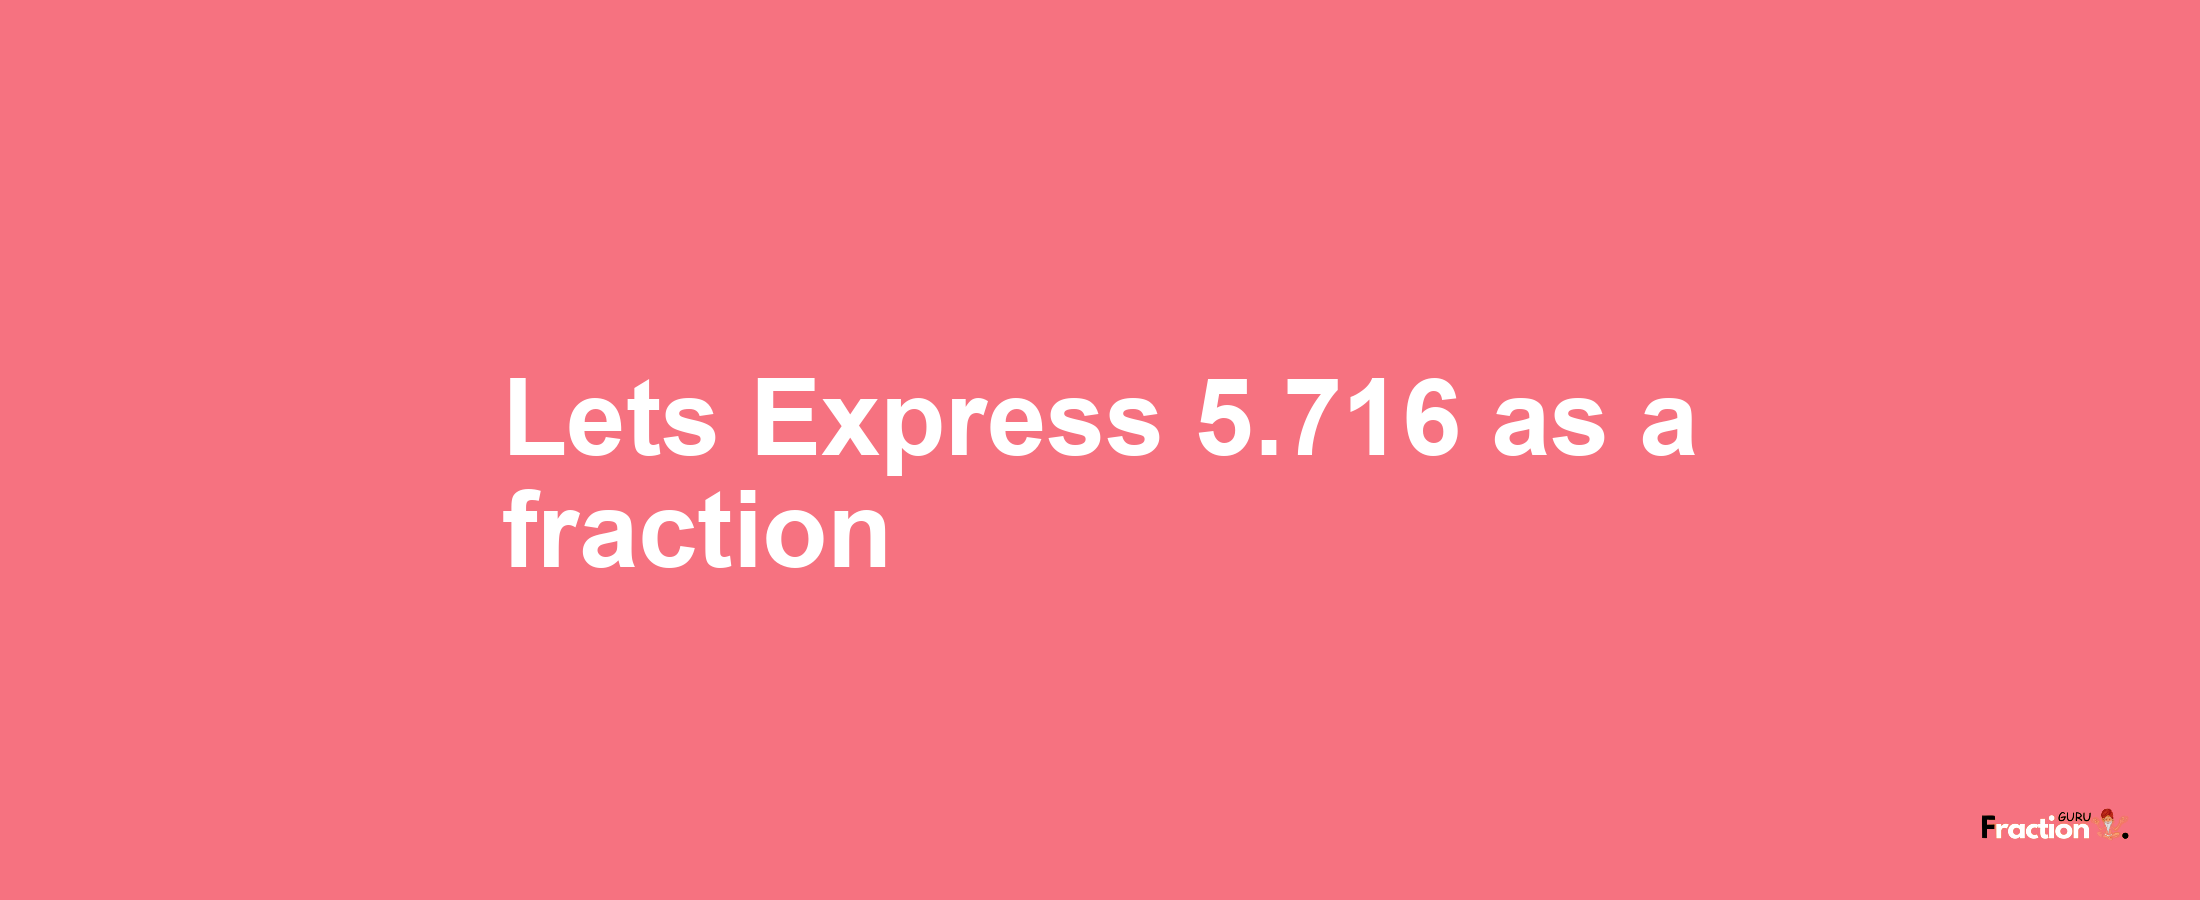 Lets Express 5.716 as afraction